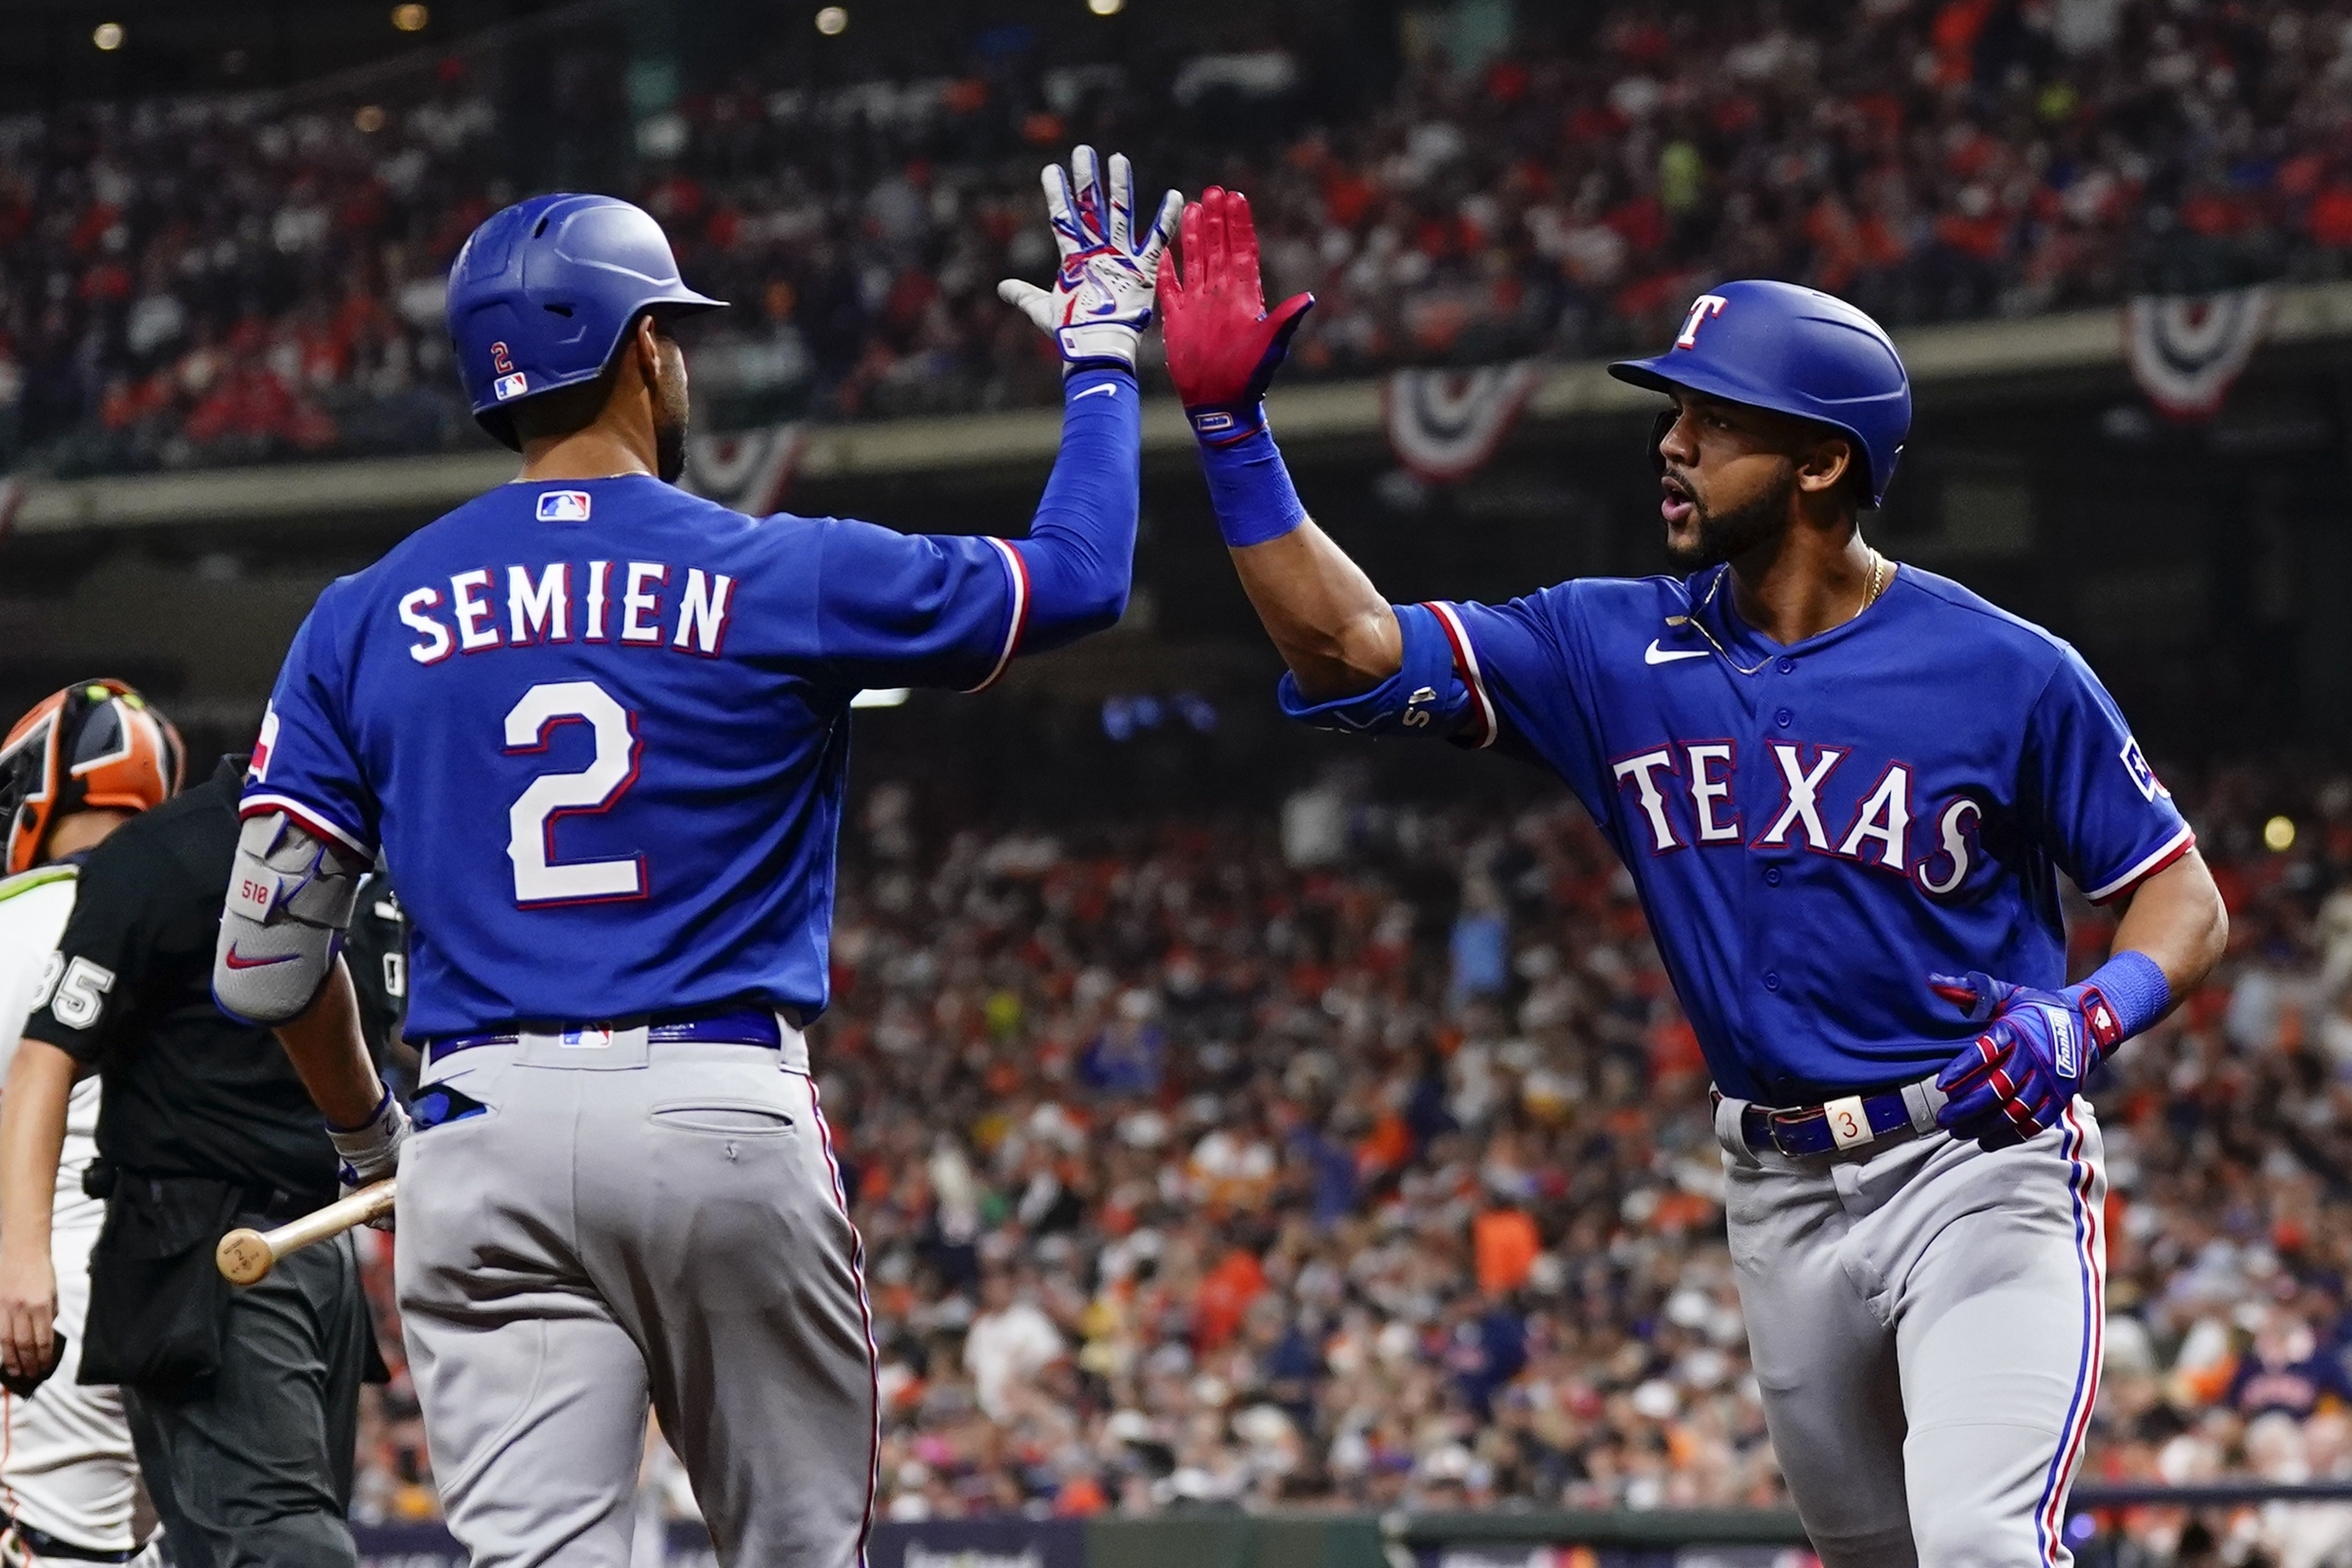 Montgomery shuts out Astros as Rangers get 2-0 win in Game 1 of